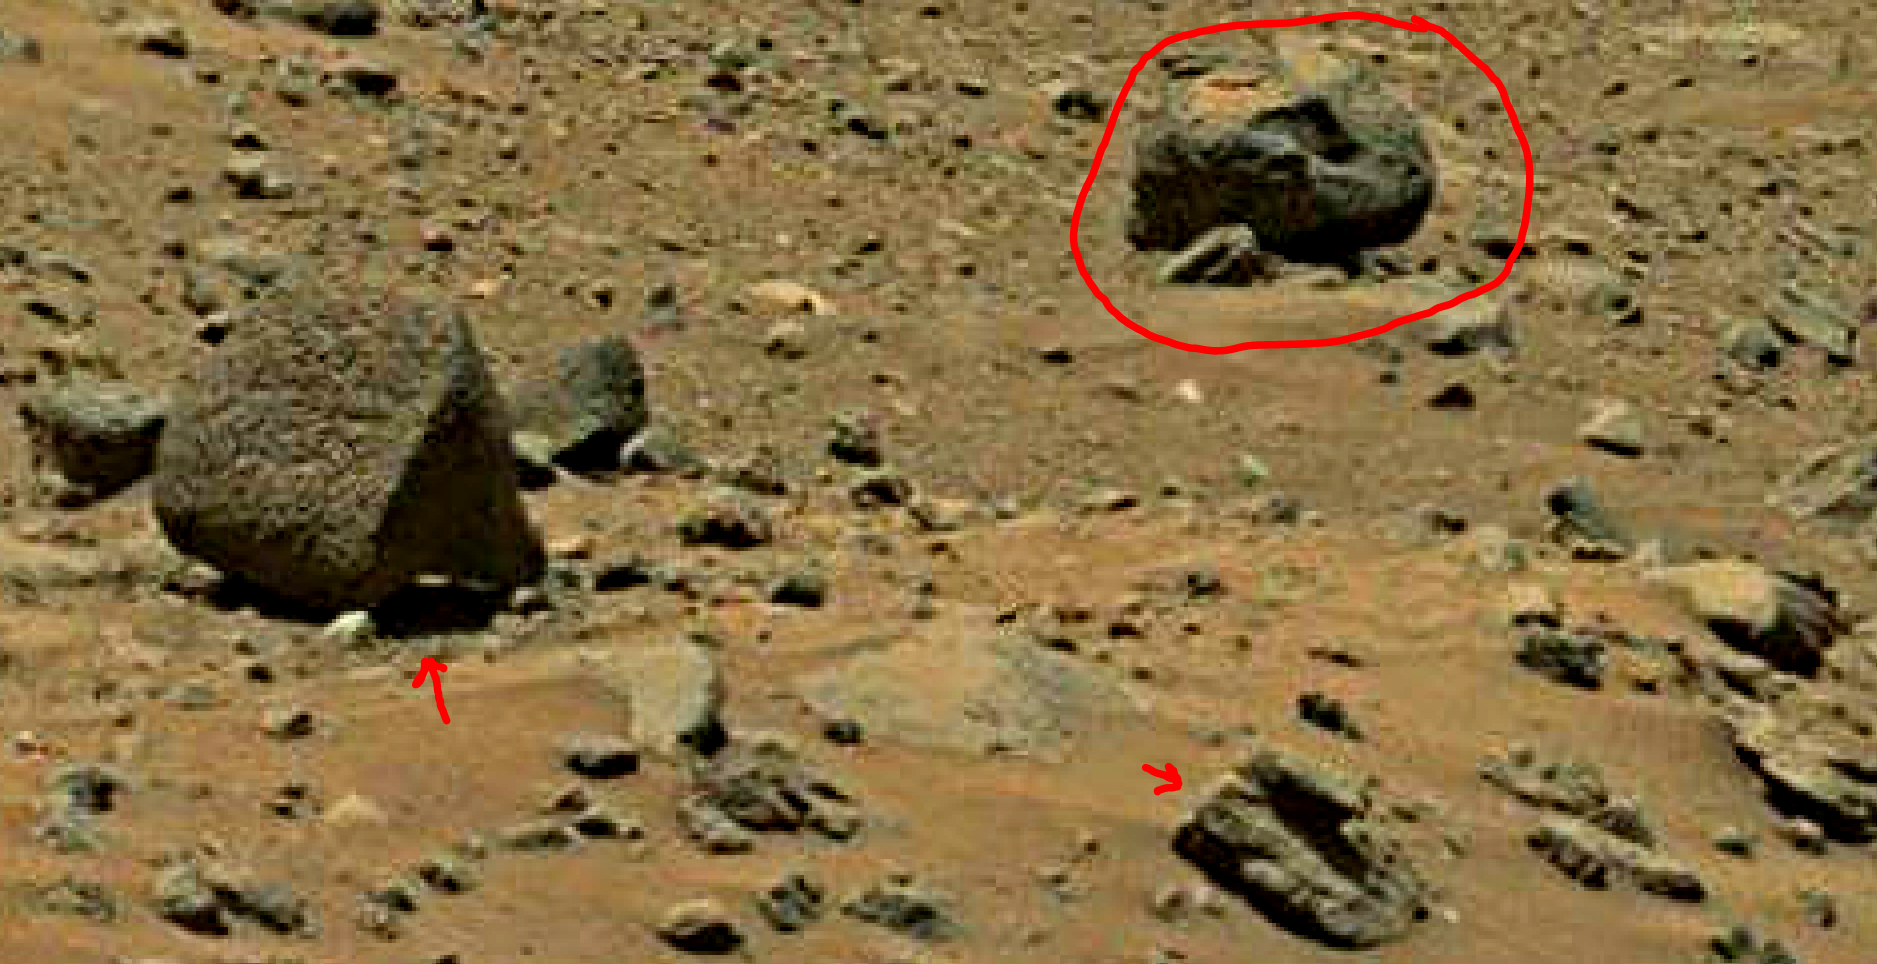 mars sol 1402 anomaly artifacts 4 was life on mars